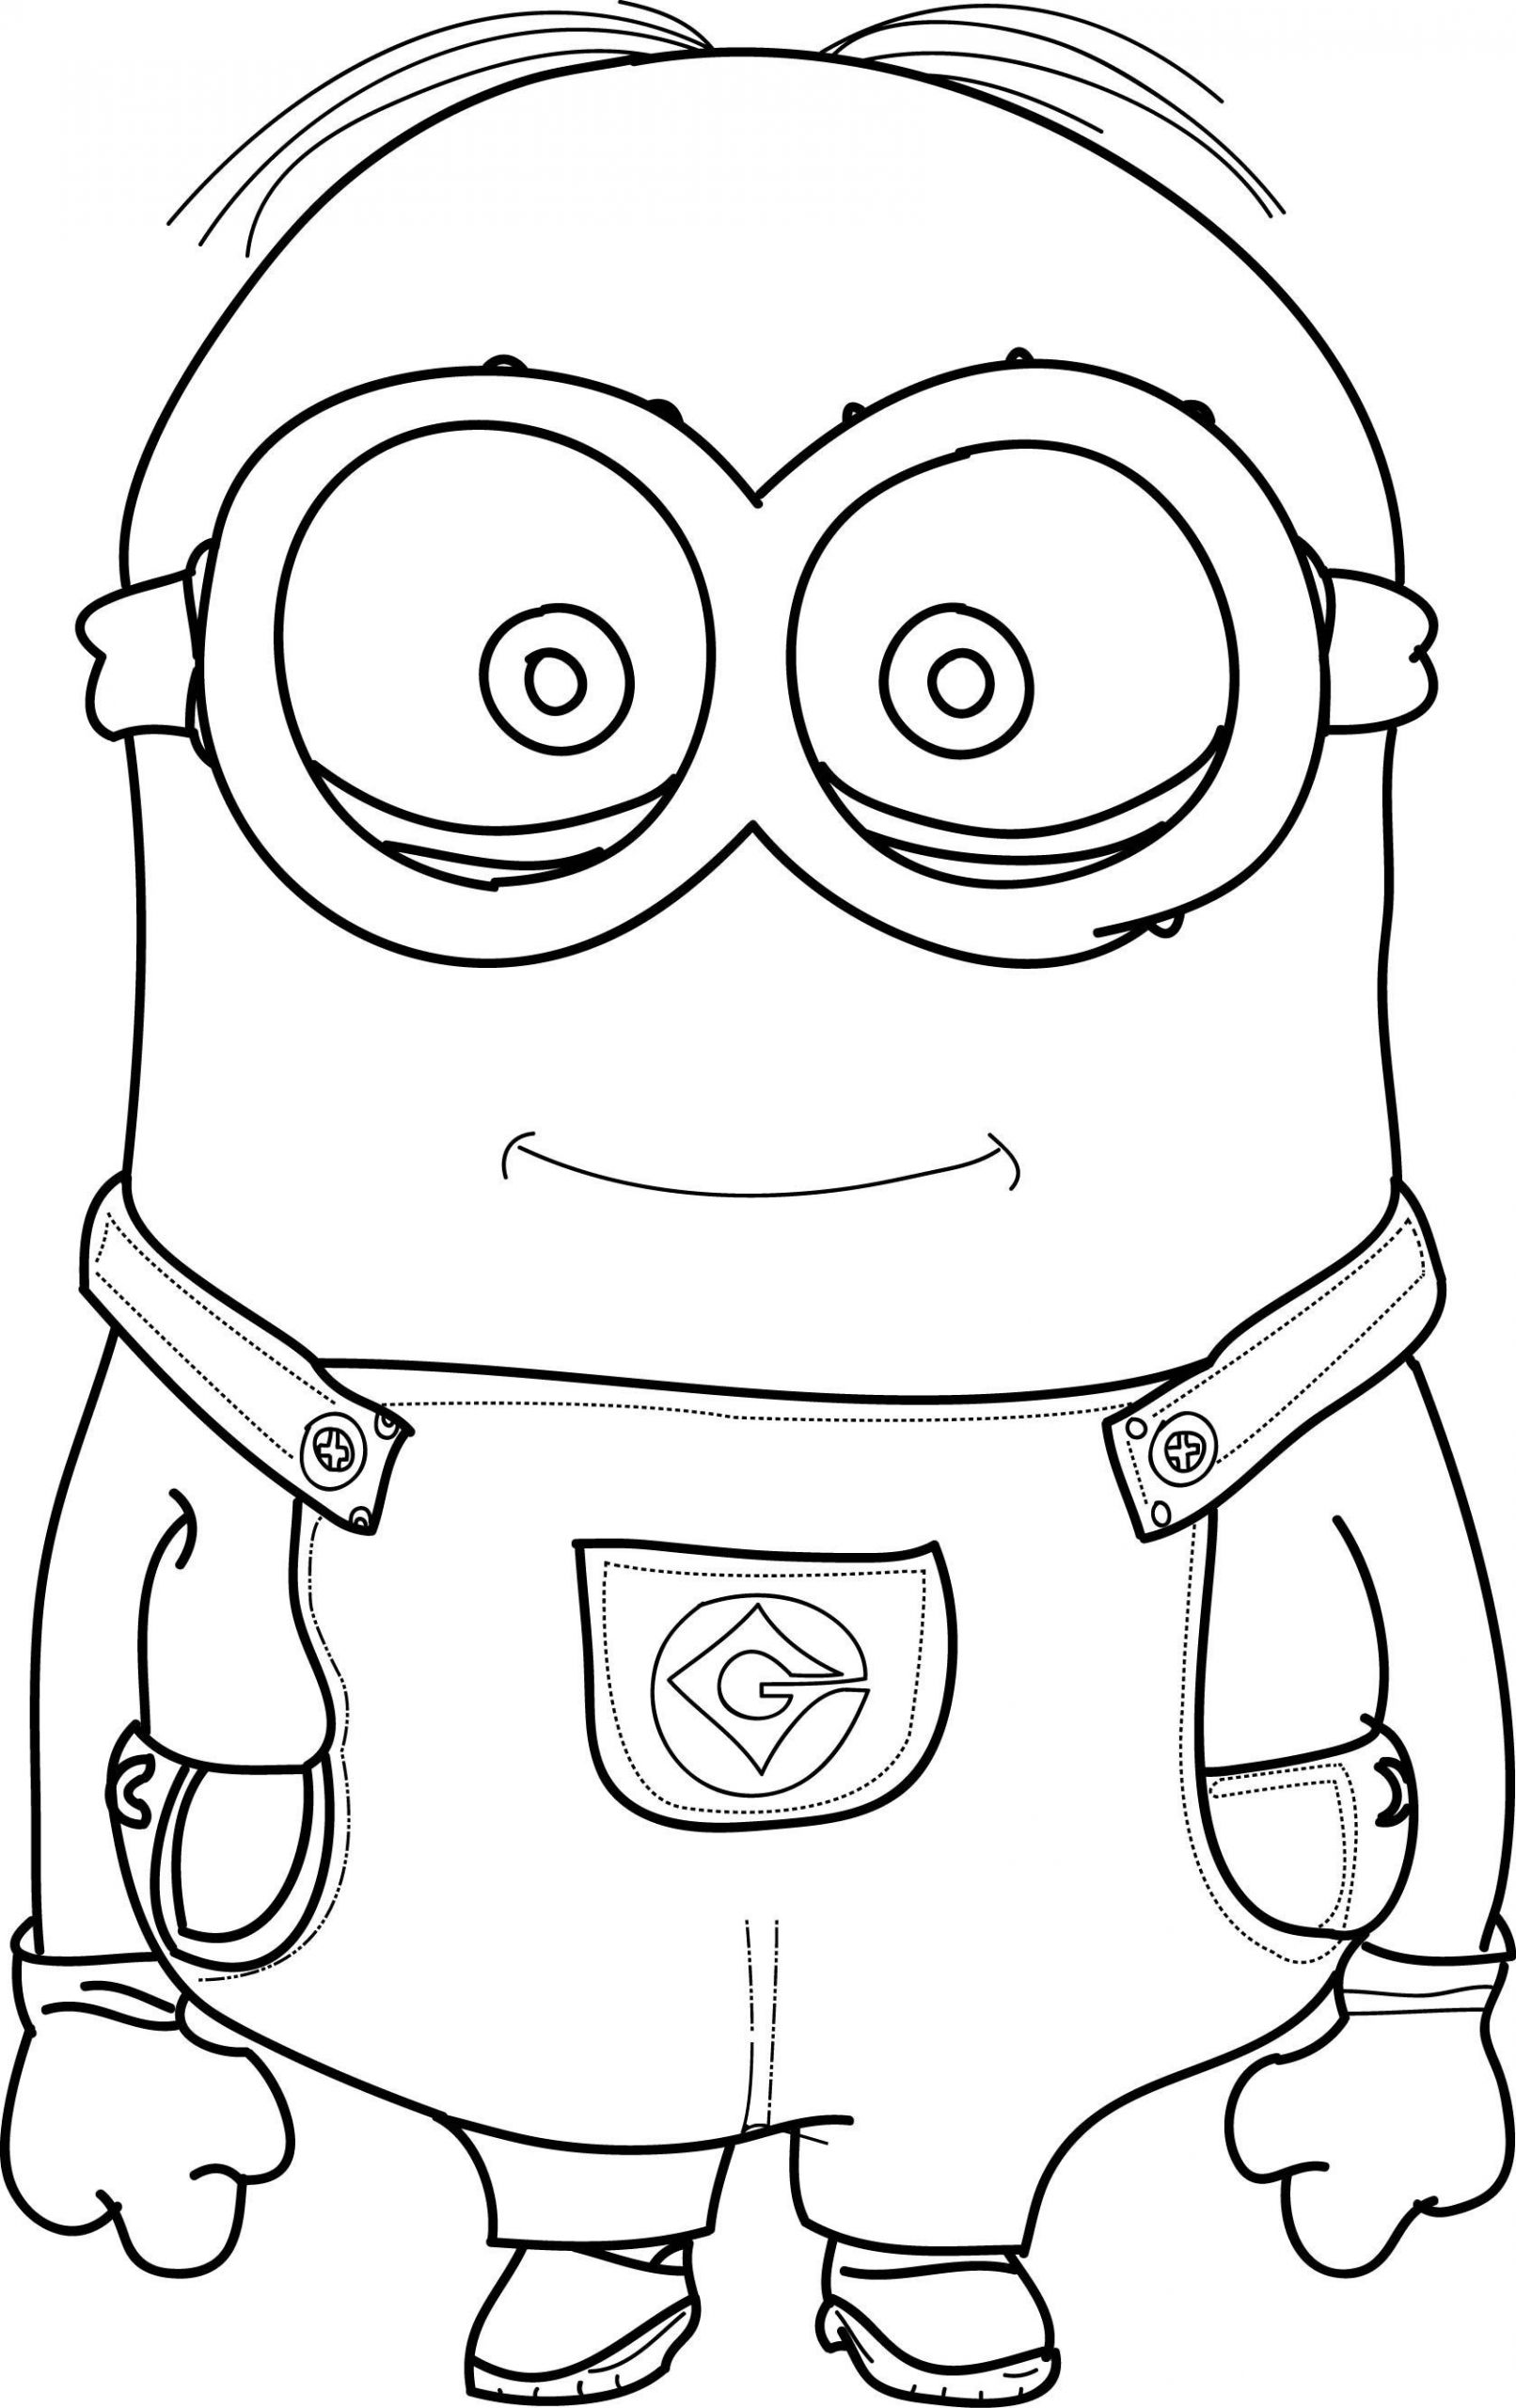 Disney Coloring Pages For Boys
 Minions Coloring Pages